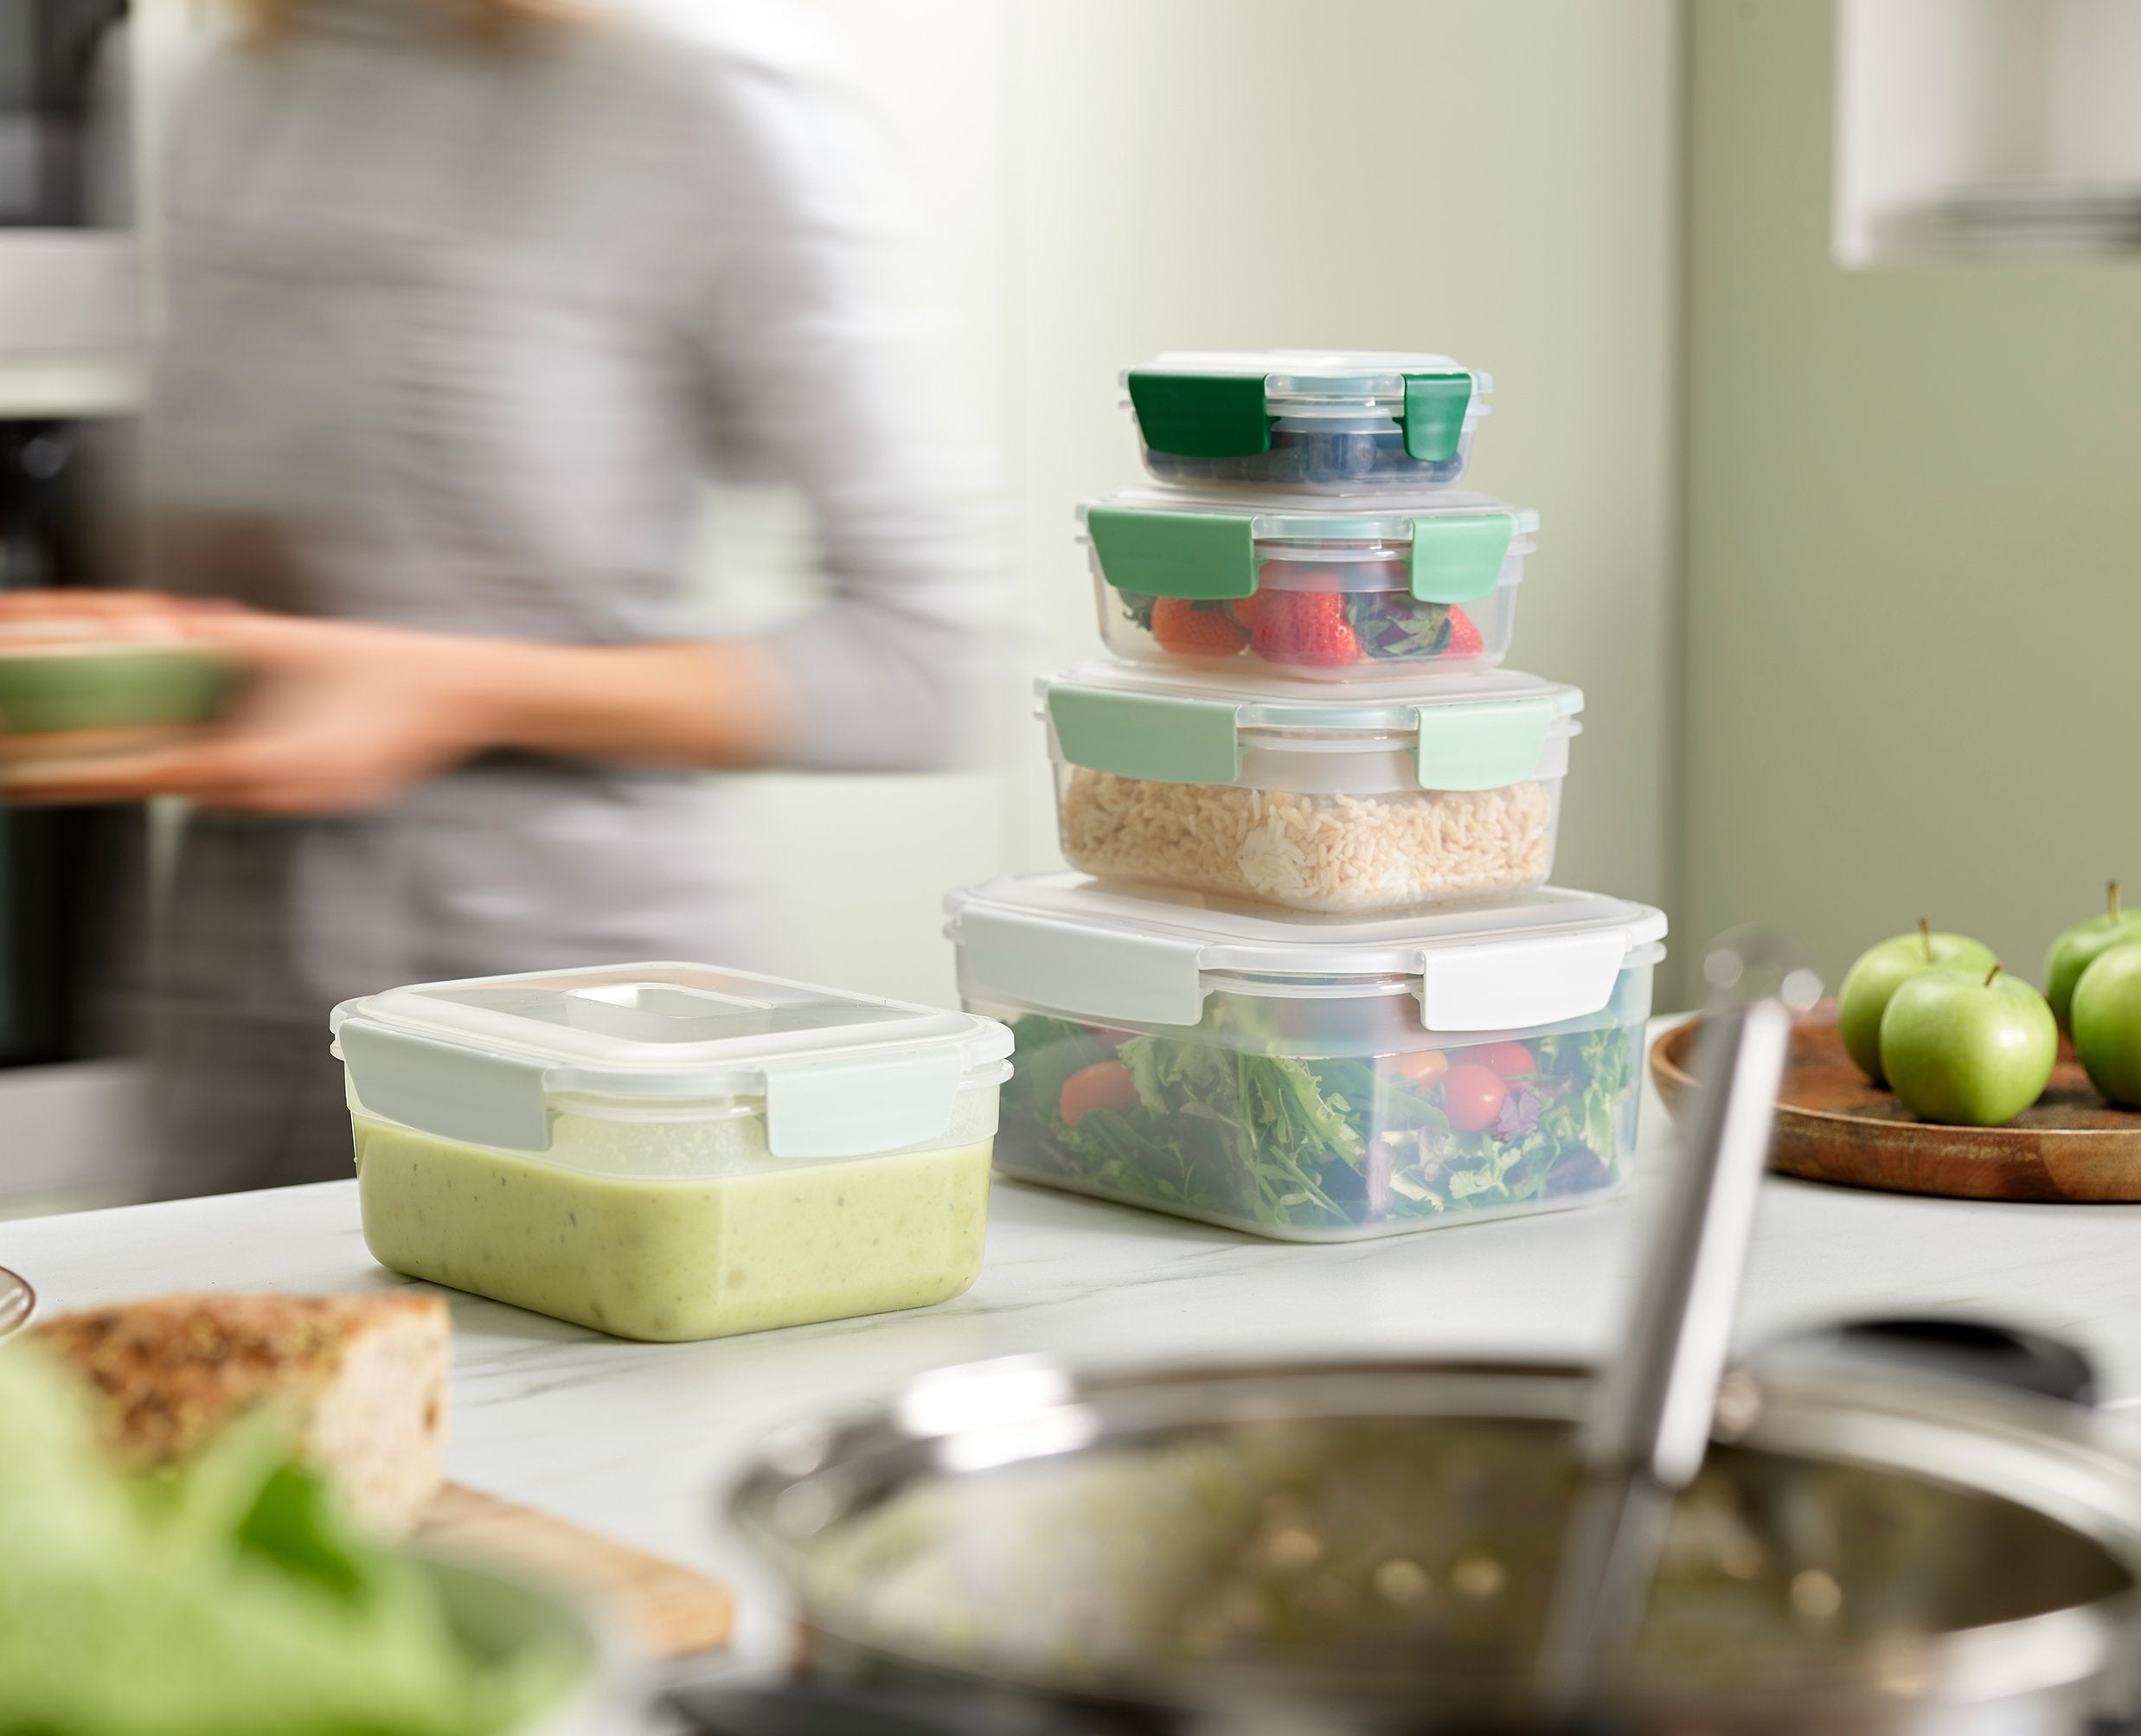 BEON.COM.AU Product Details The unique design of these food storage containers means the bases nest neatly inside each other while the lids clip conveniently together for efficient, space-saving storage.  Space-saving, nesting design Easy-find, snap-together lids and colour-coded bases Airtight, leakproof an... Joseph Joseph at BEON.COM.AU